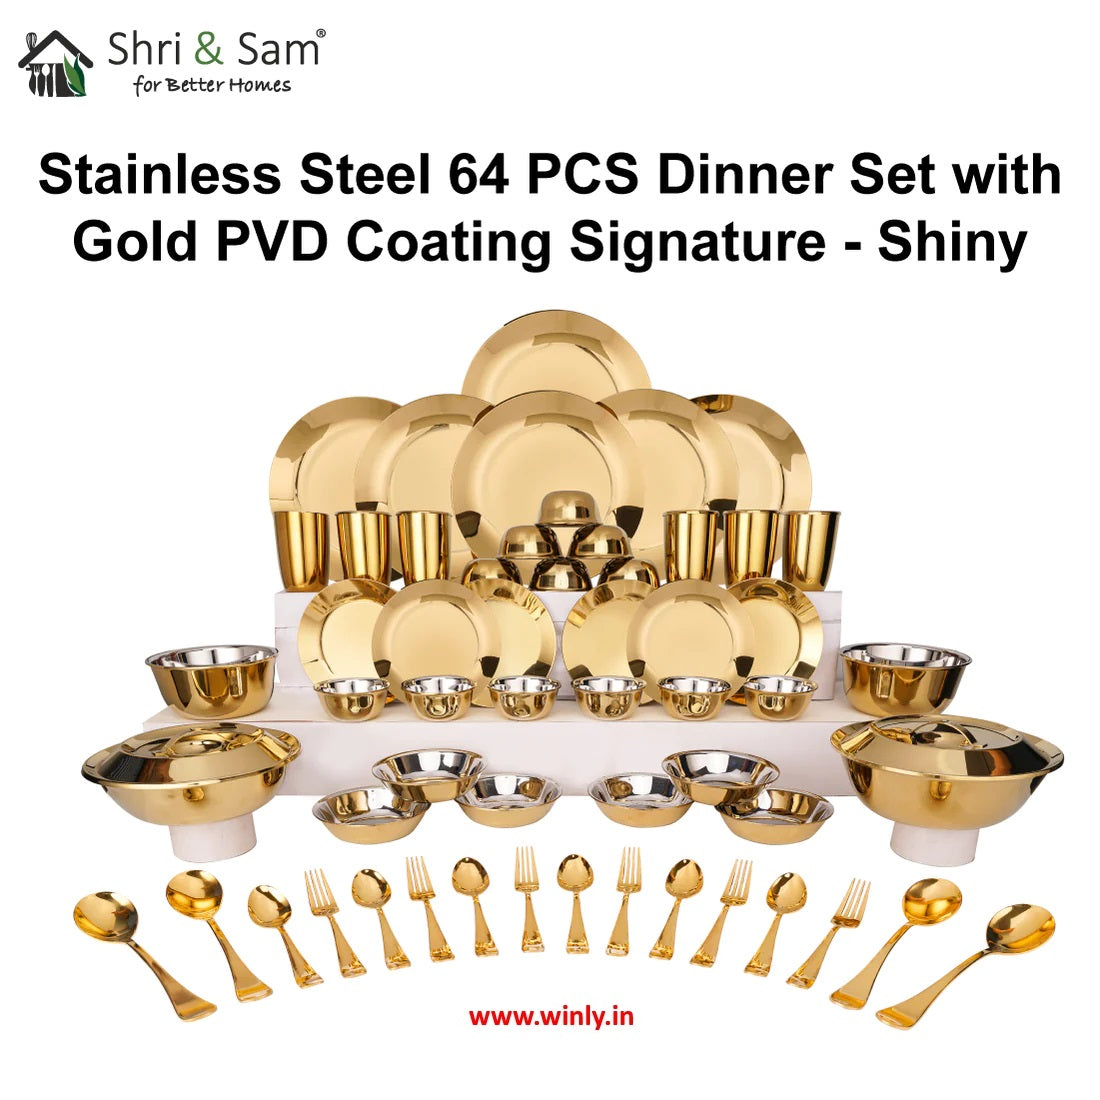 Shri & Sam Stainless Steel 64 PCS Dinner Set (6 People) with Gold PVD Coating Signature - Shiny